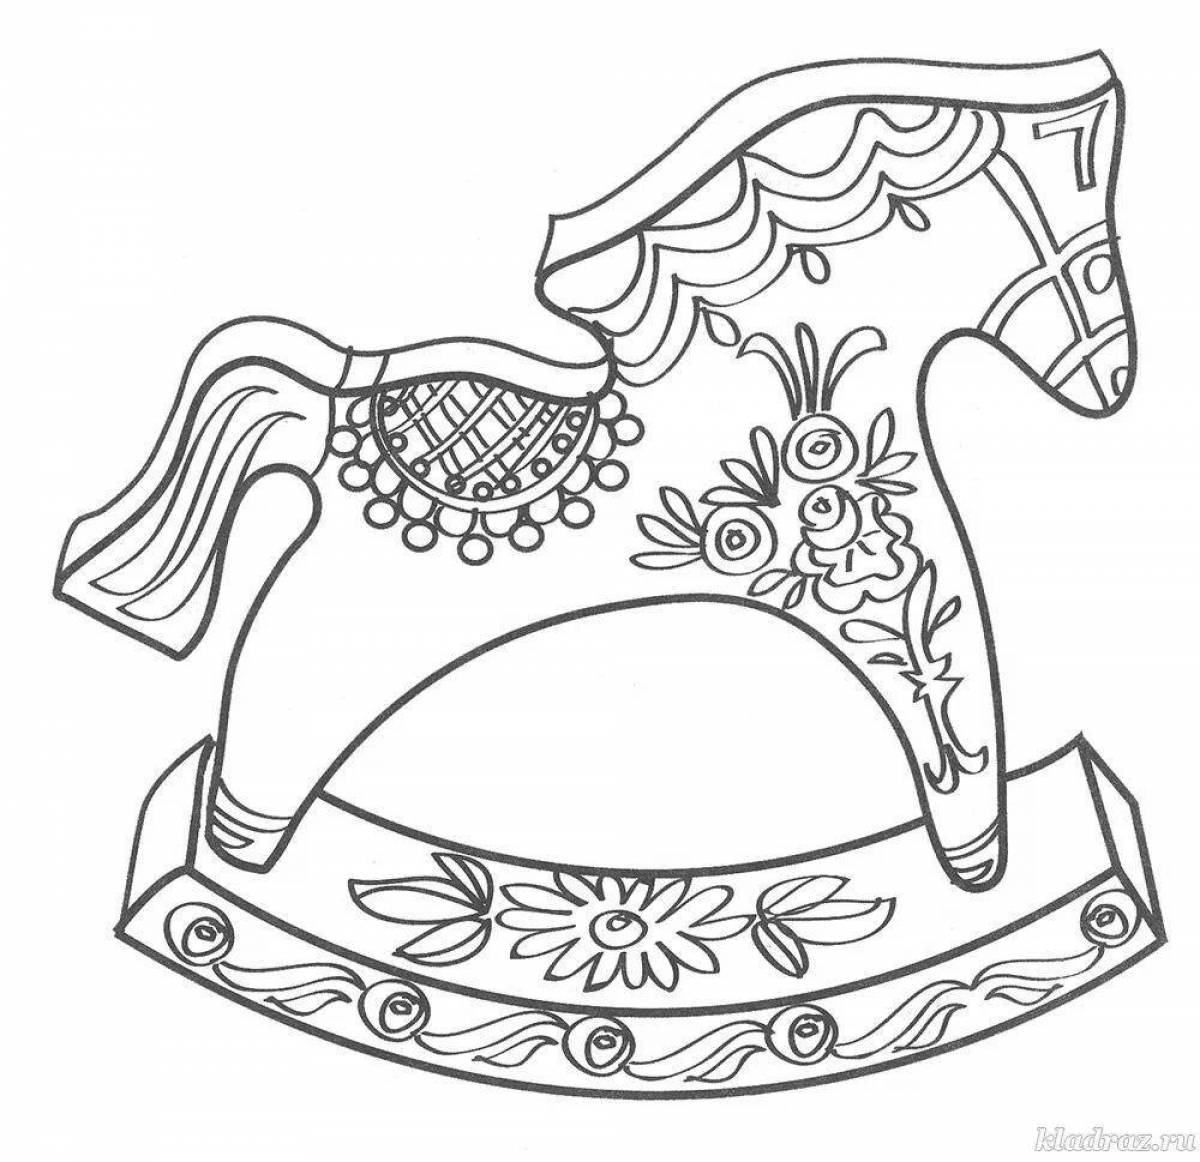 Fine rocking horse coloring page